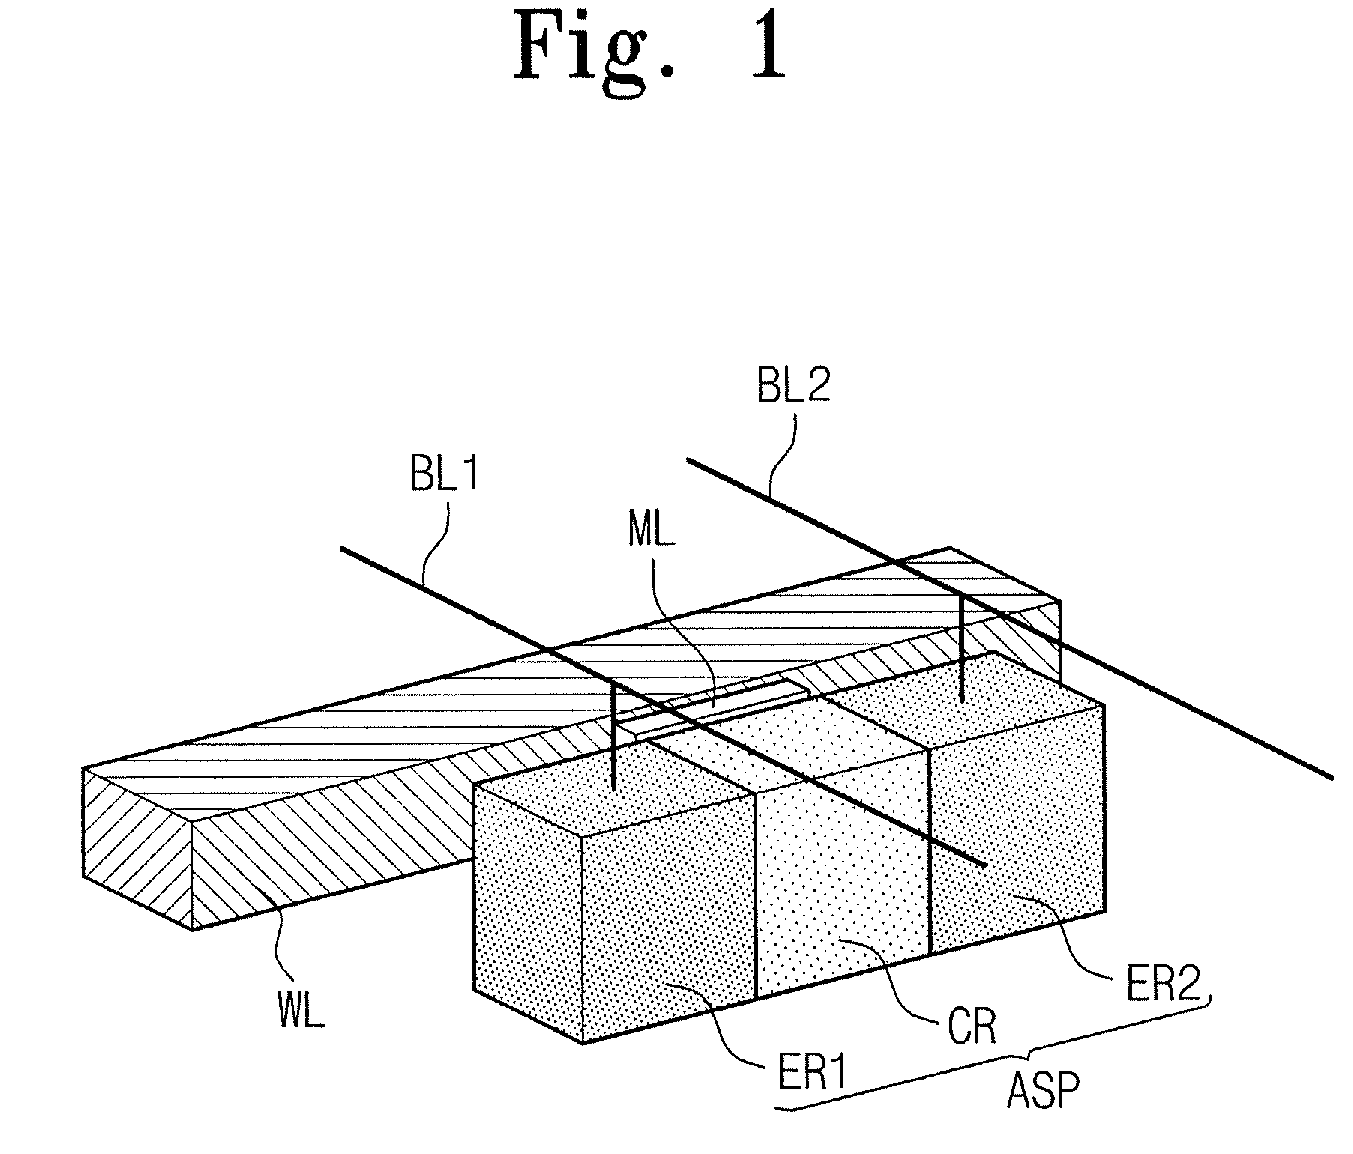 Three-dimensional semiconductor devices